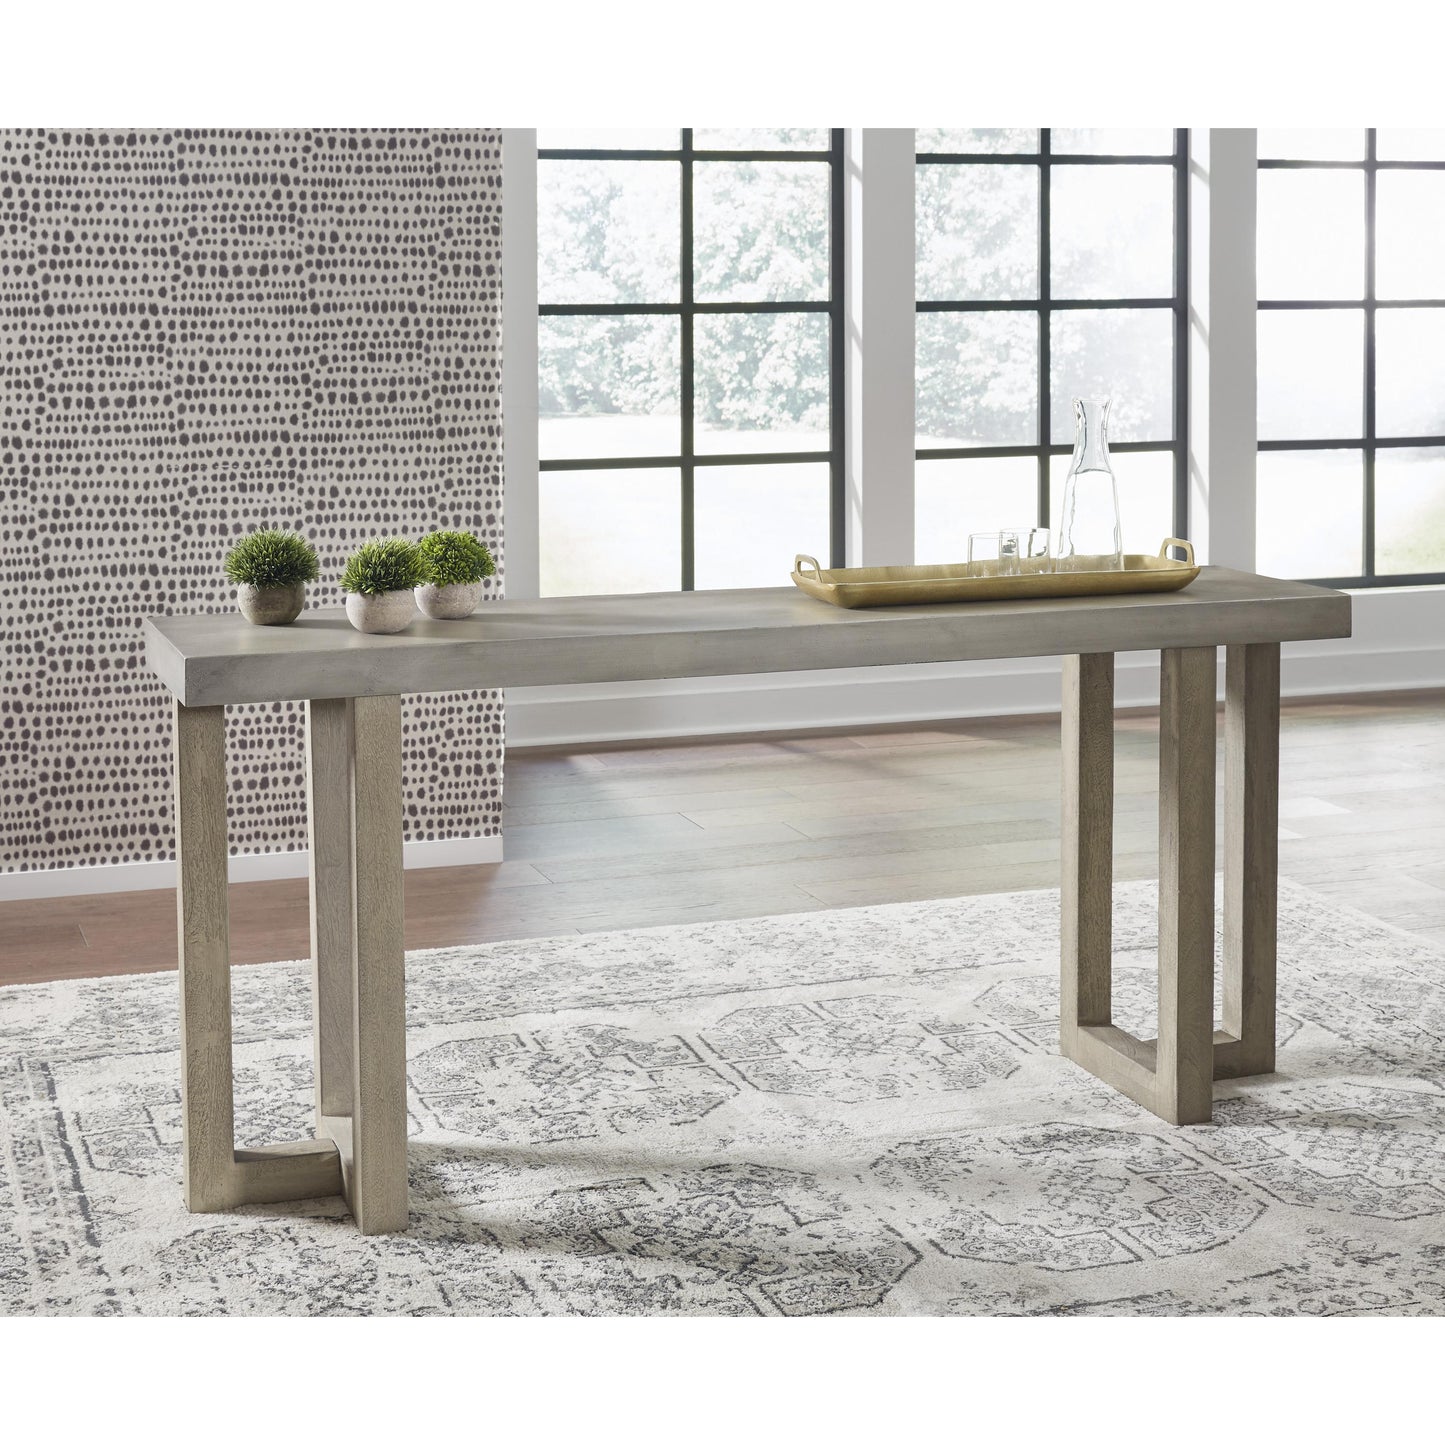 Signature Design by Ashley Lockthorne Console Table T988-4 IMAGE 5